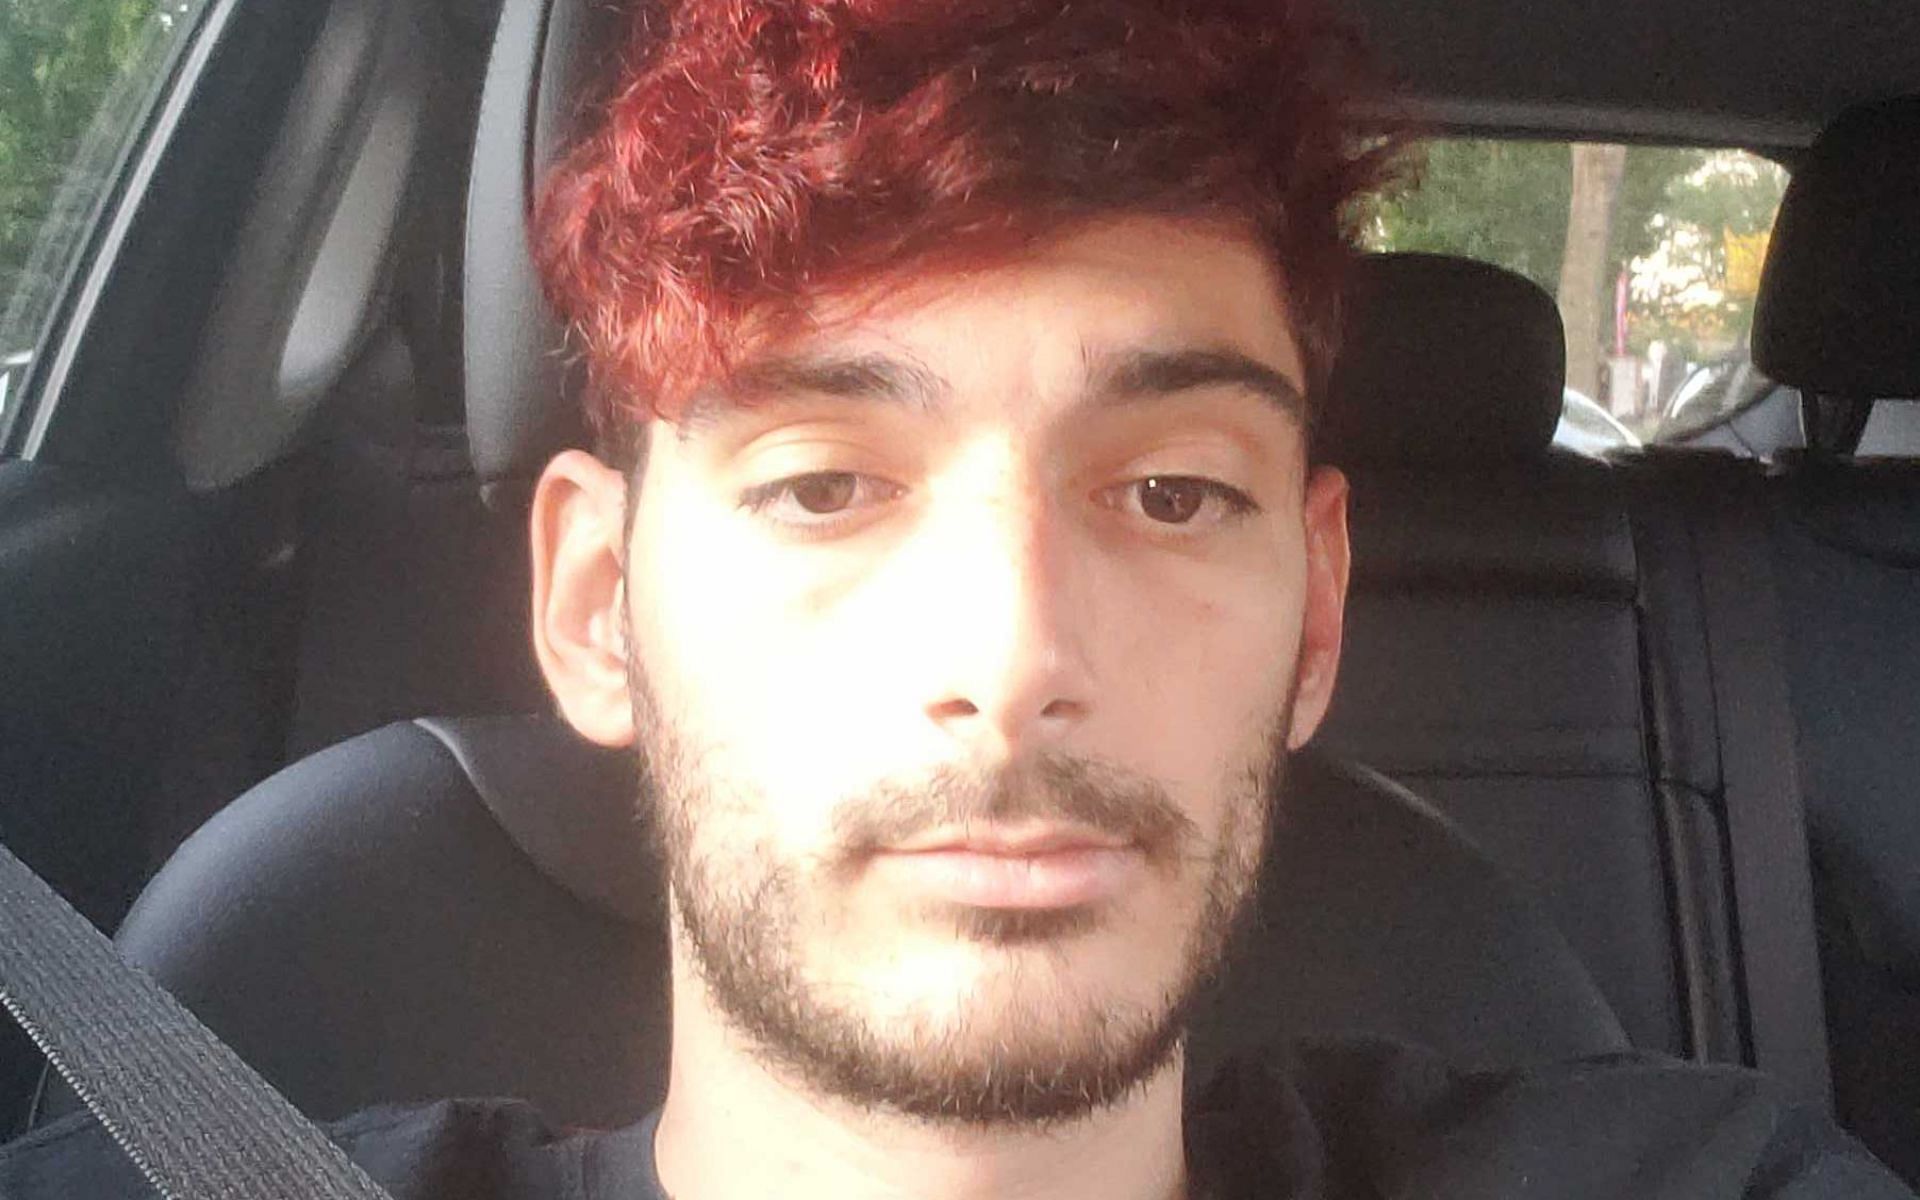 Ice Poseidon shares update after getting imprisoned in Thailand (Image via Ice Poseidon/Twitter)